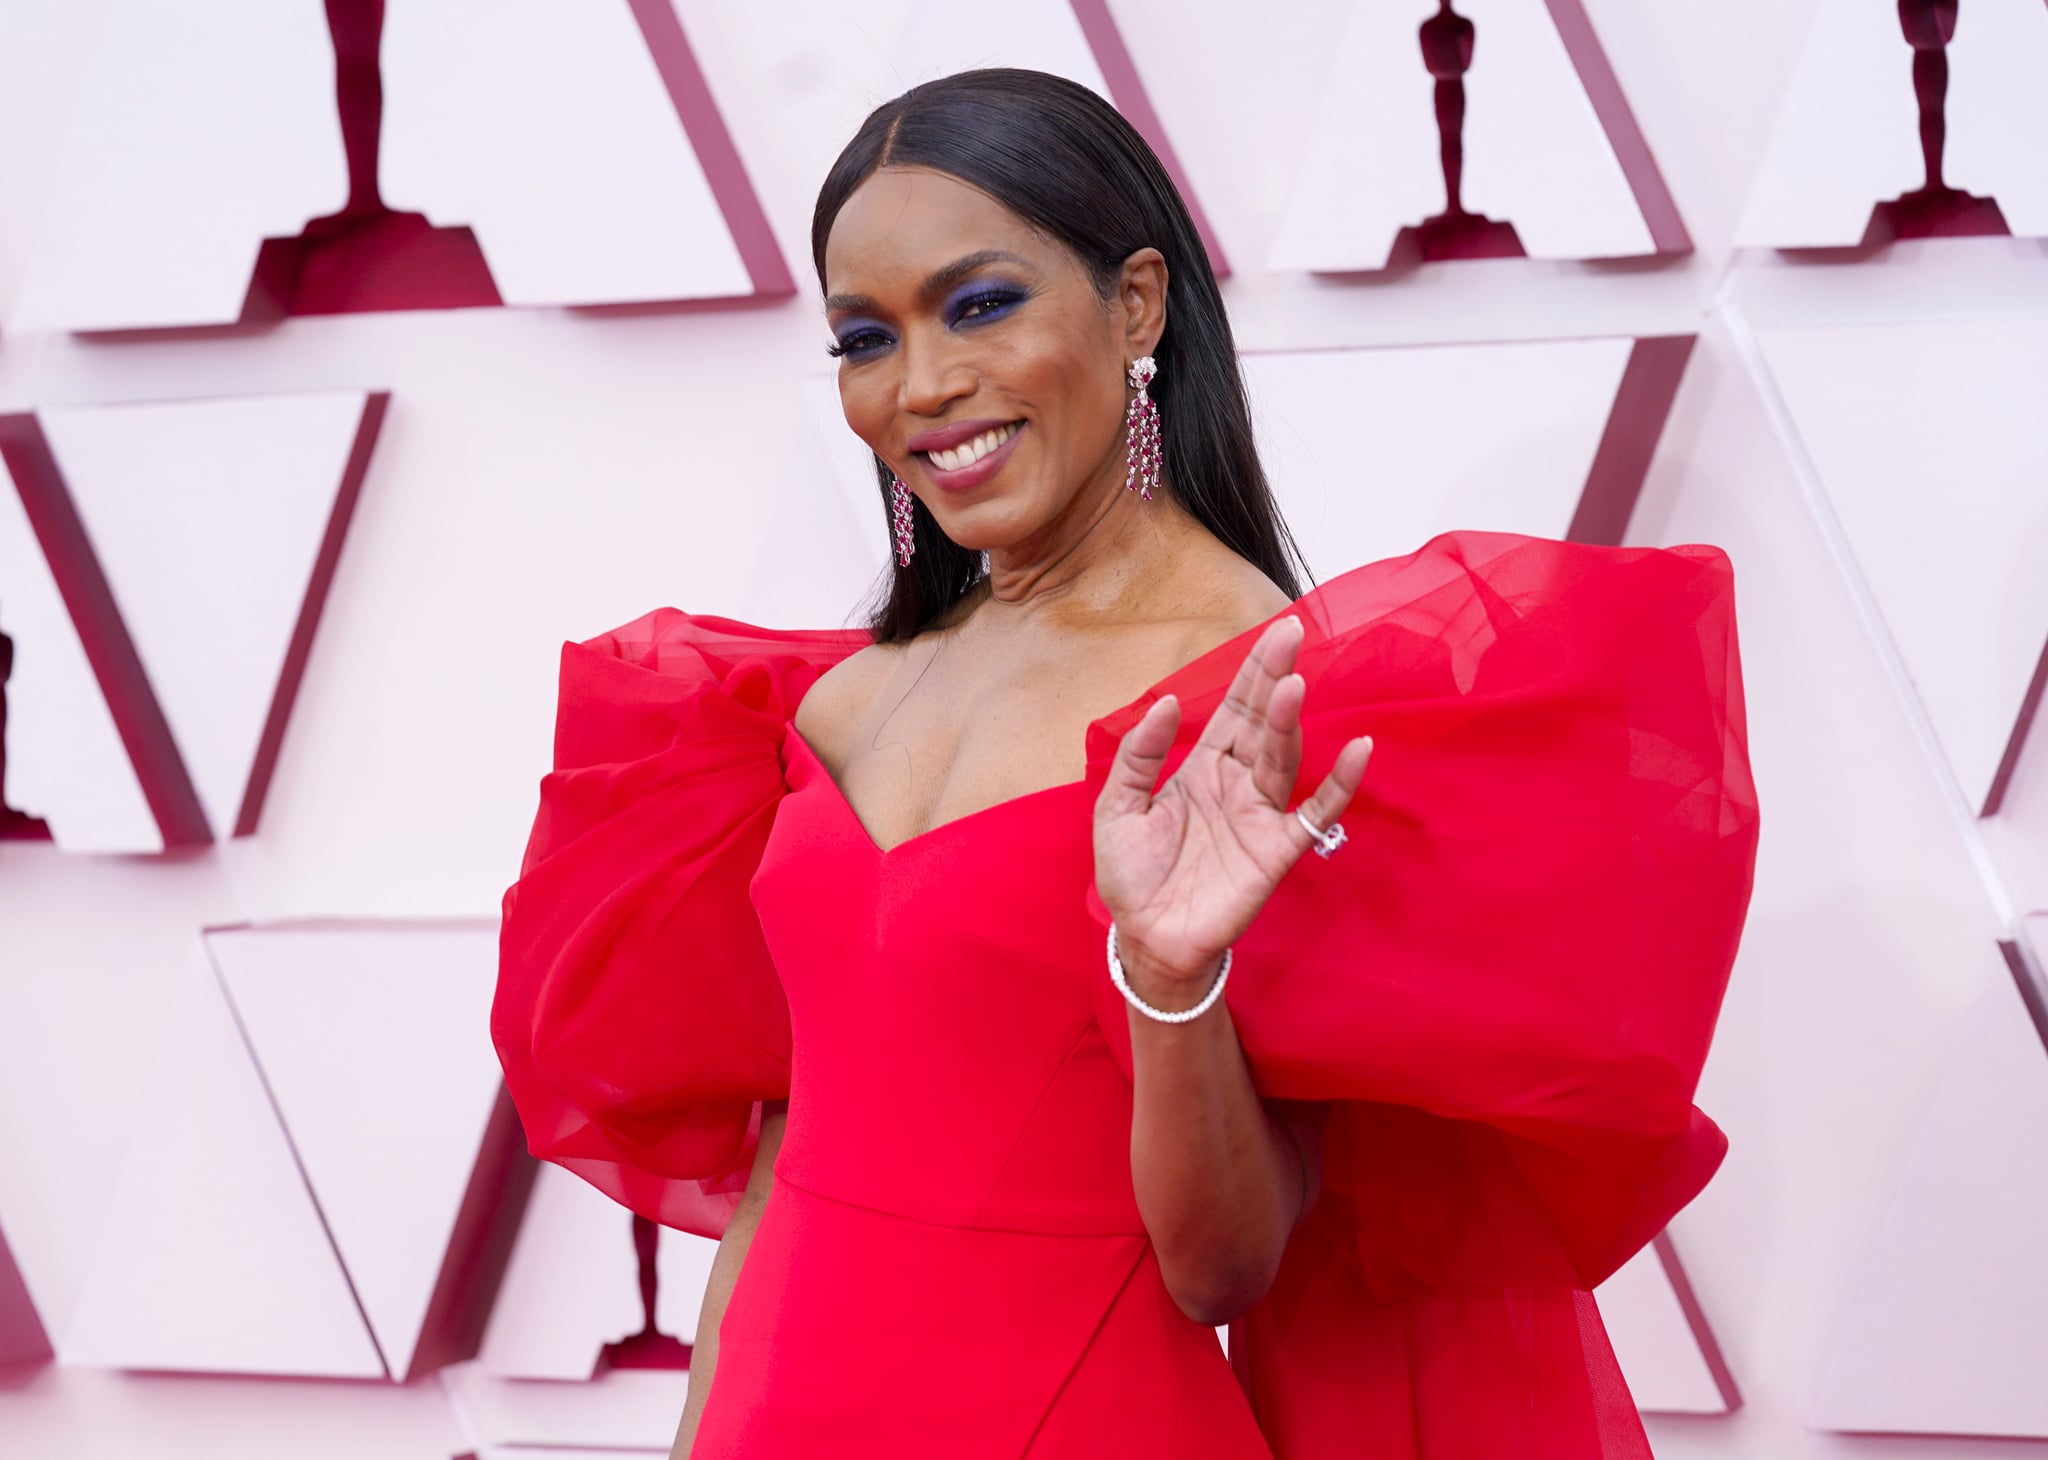 LOS ANGELES, CALIFORNIA – APRIL 25: Angela Bassett attends the 93rd Annual Academy Awards at Union Station on April 25, 2021 in Los Angeles, California. (Photo by Chris Pizzello-Pool/Getty Images)